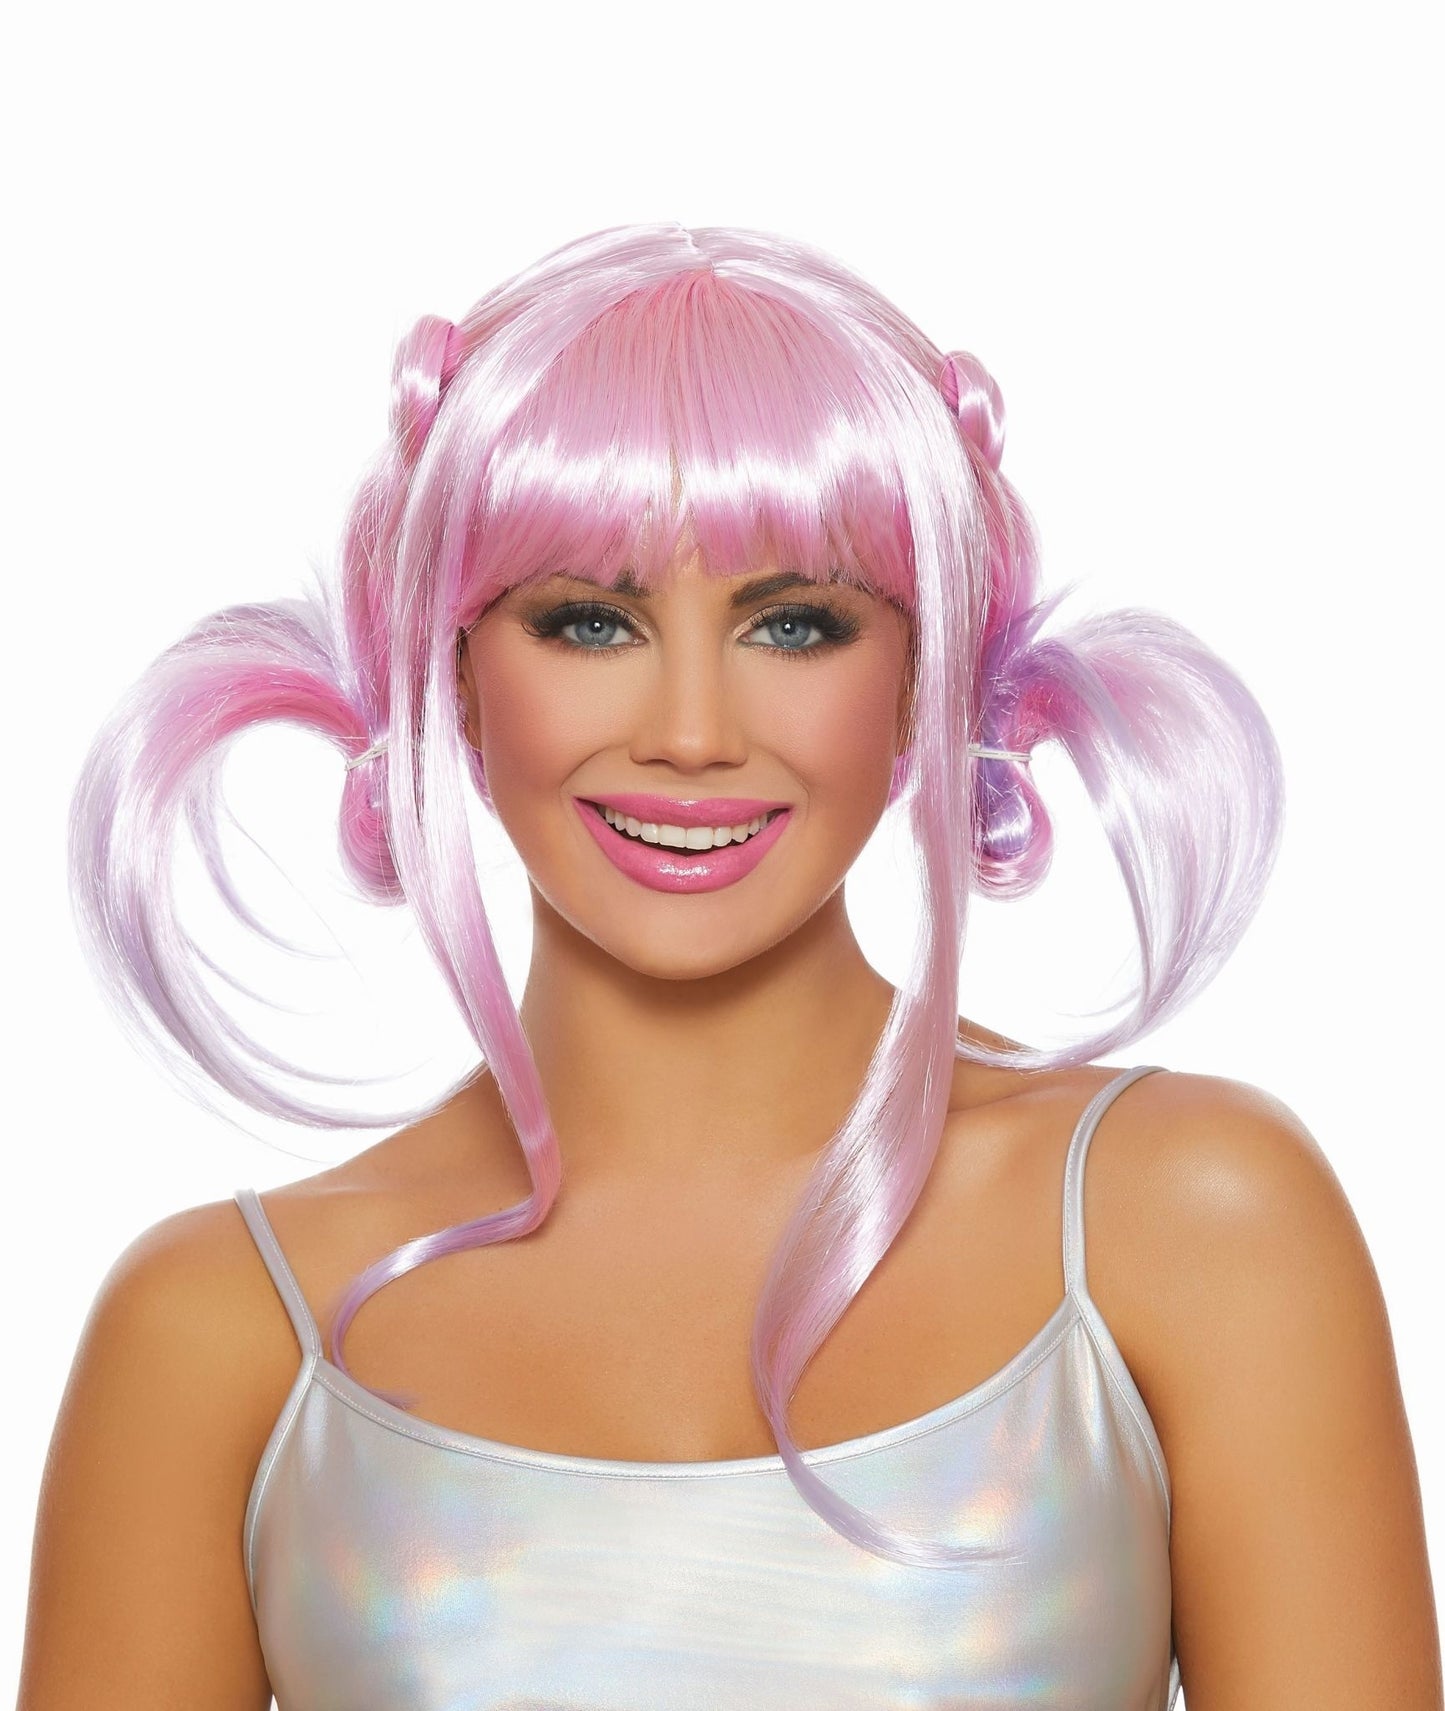 Anime Ombré Pink/Lavender Wig with Pigtails